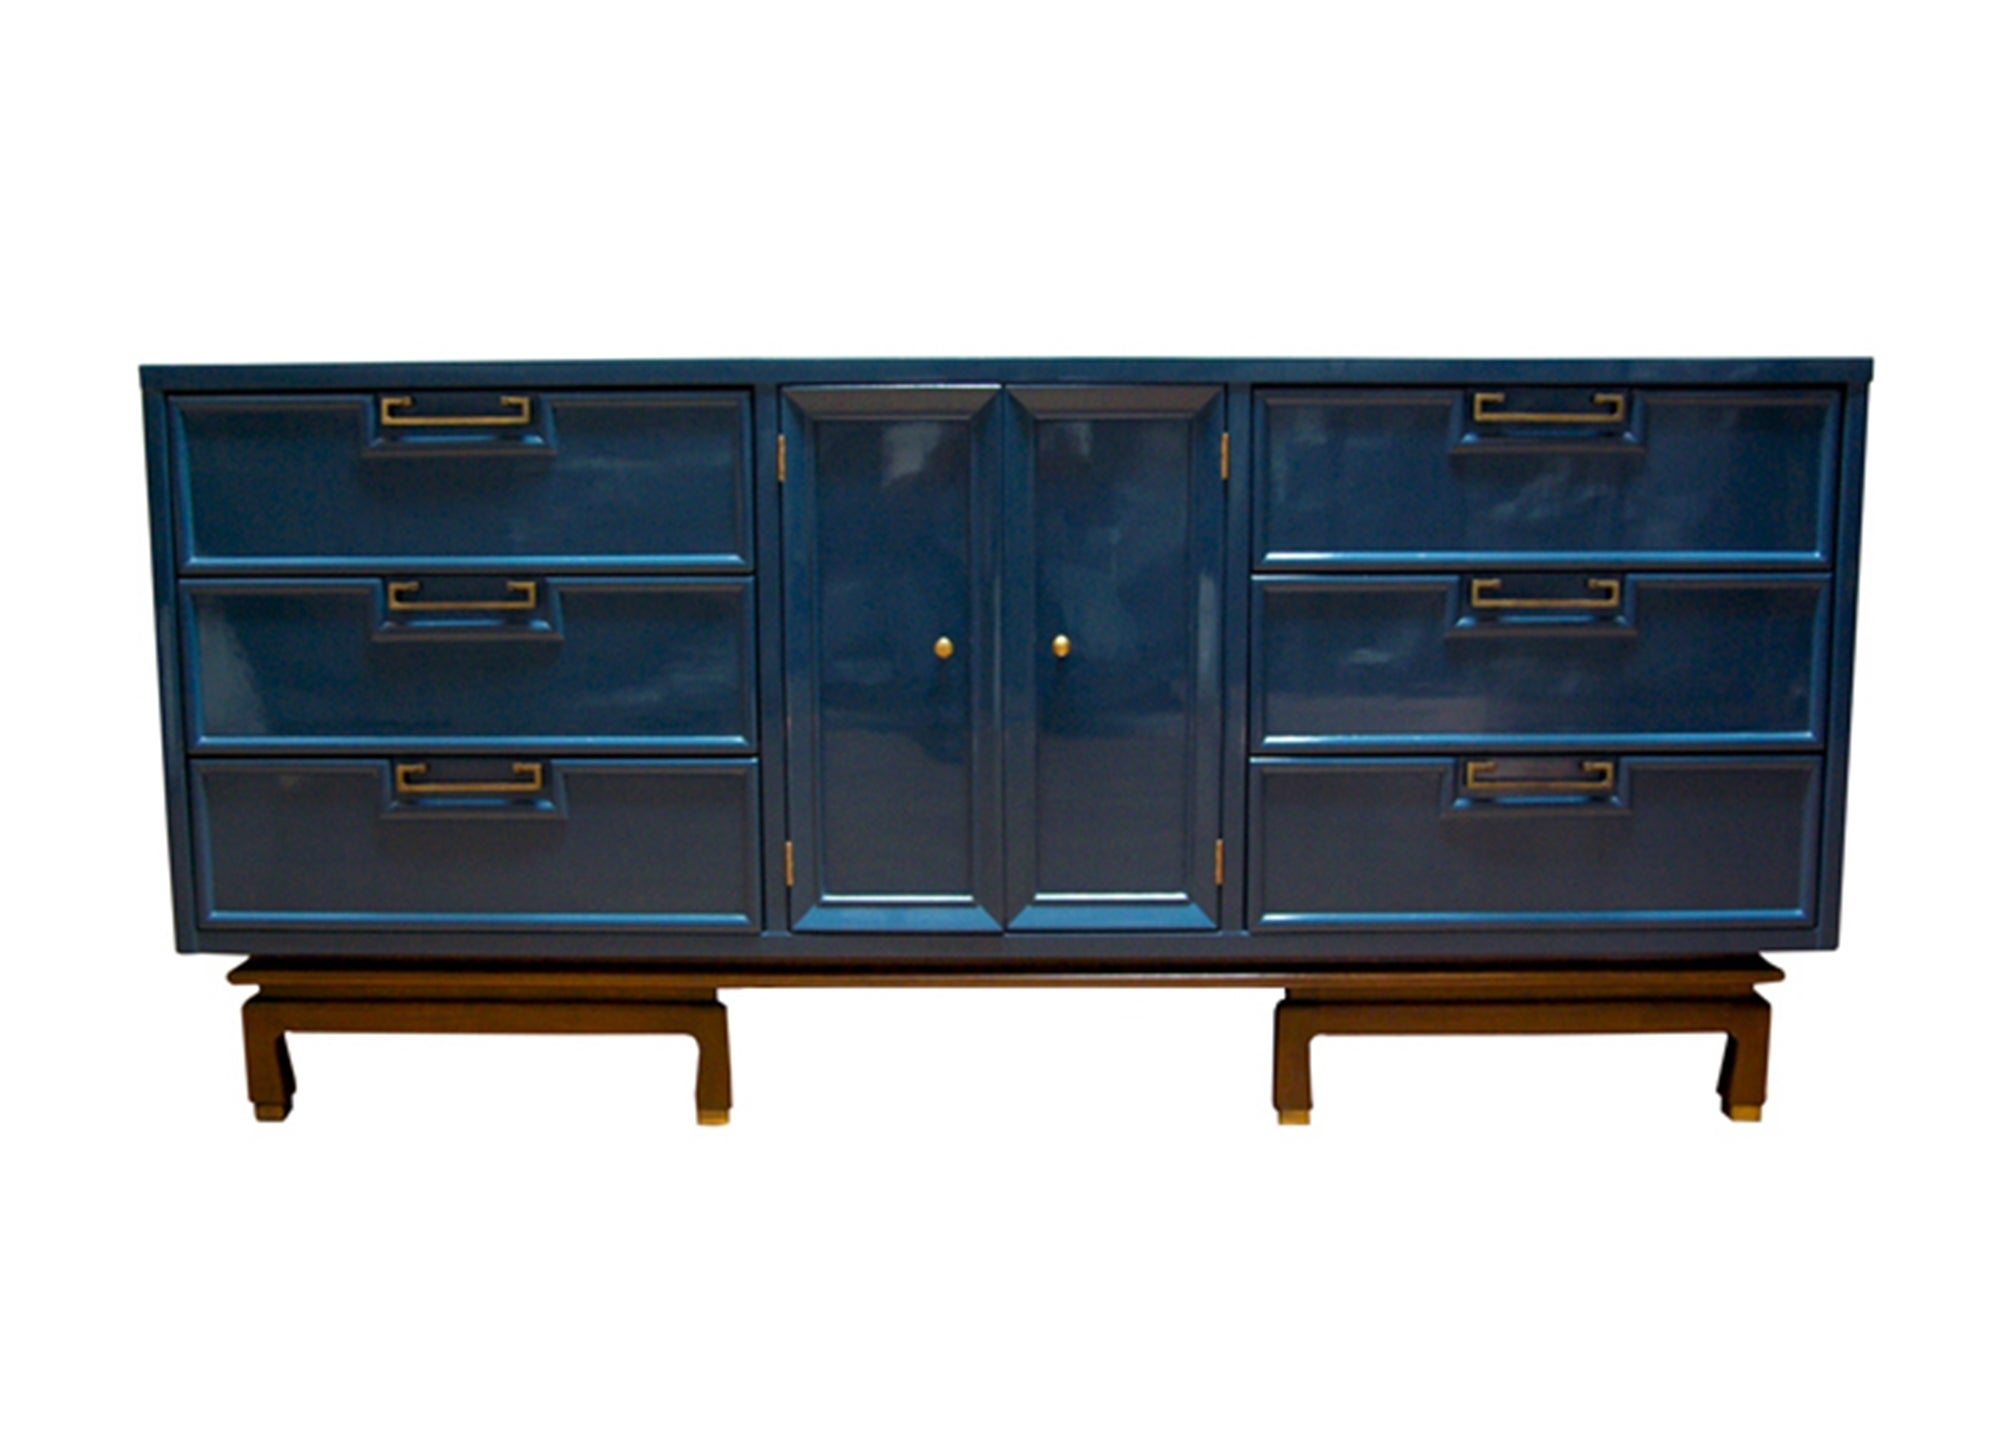 American of Martinsville Dresser in Lacquered Teal Color